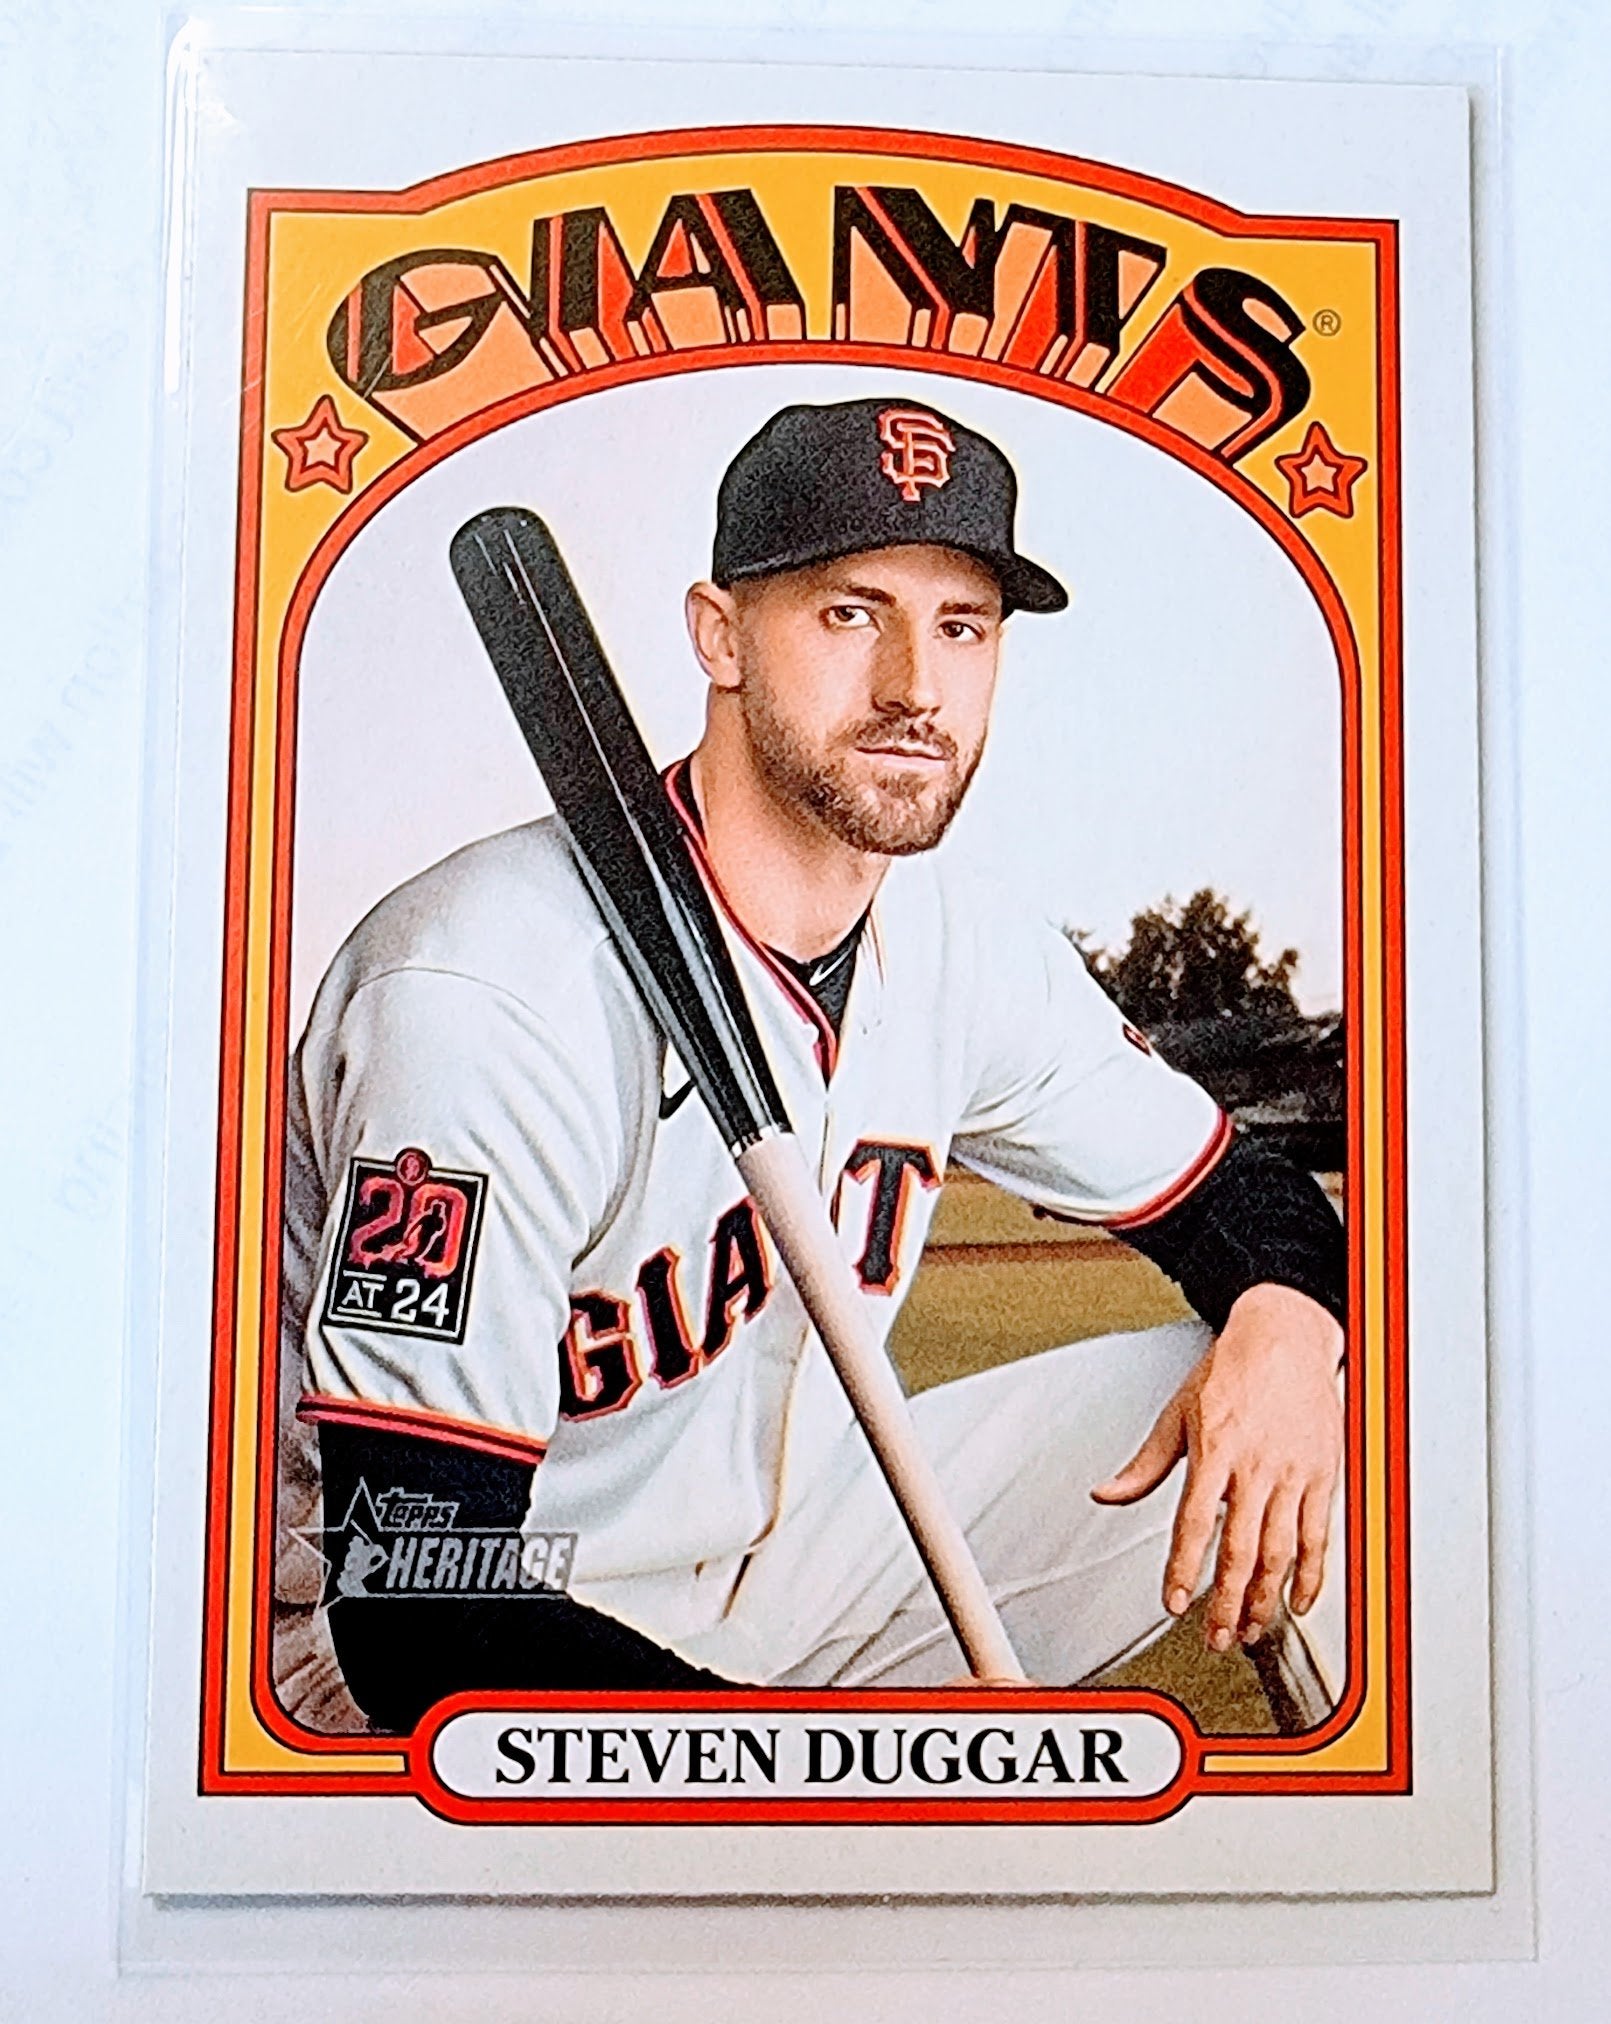 2021 Topps Heritage Steven Duggar Baseball Trading Card MCSC1 simple Xclusive Collectibles   